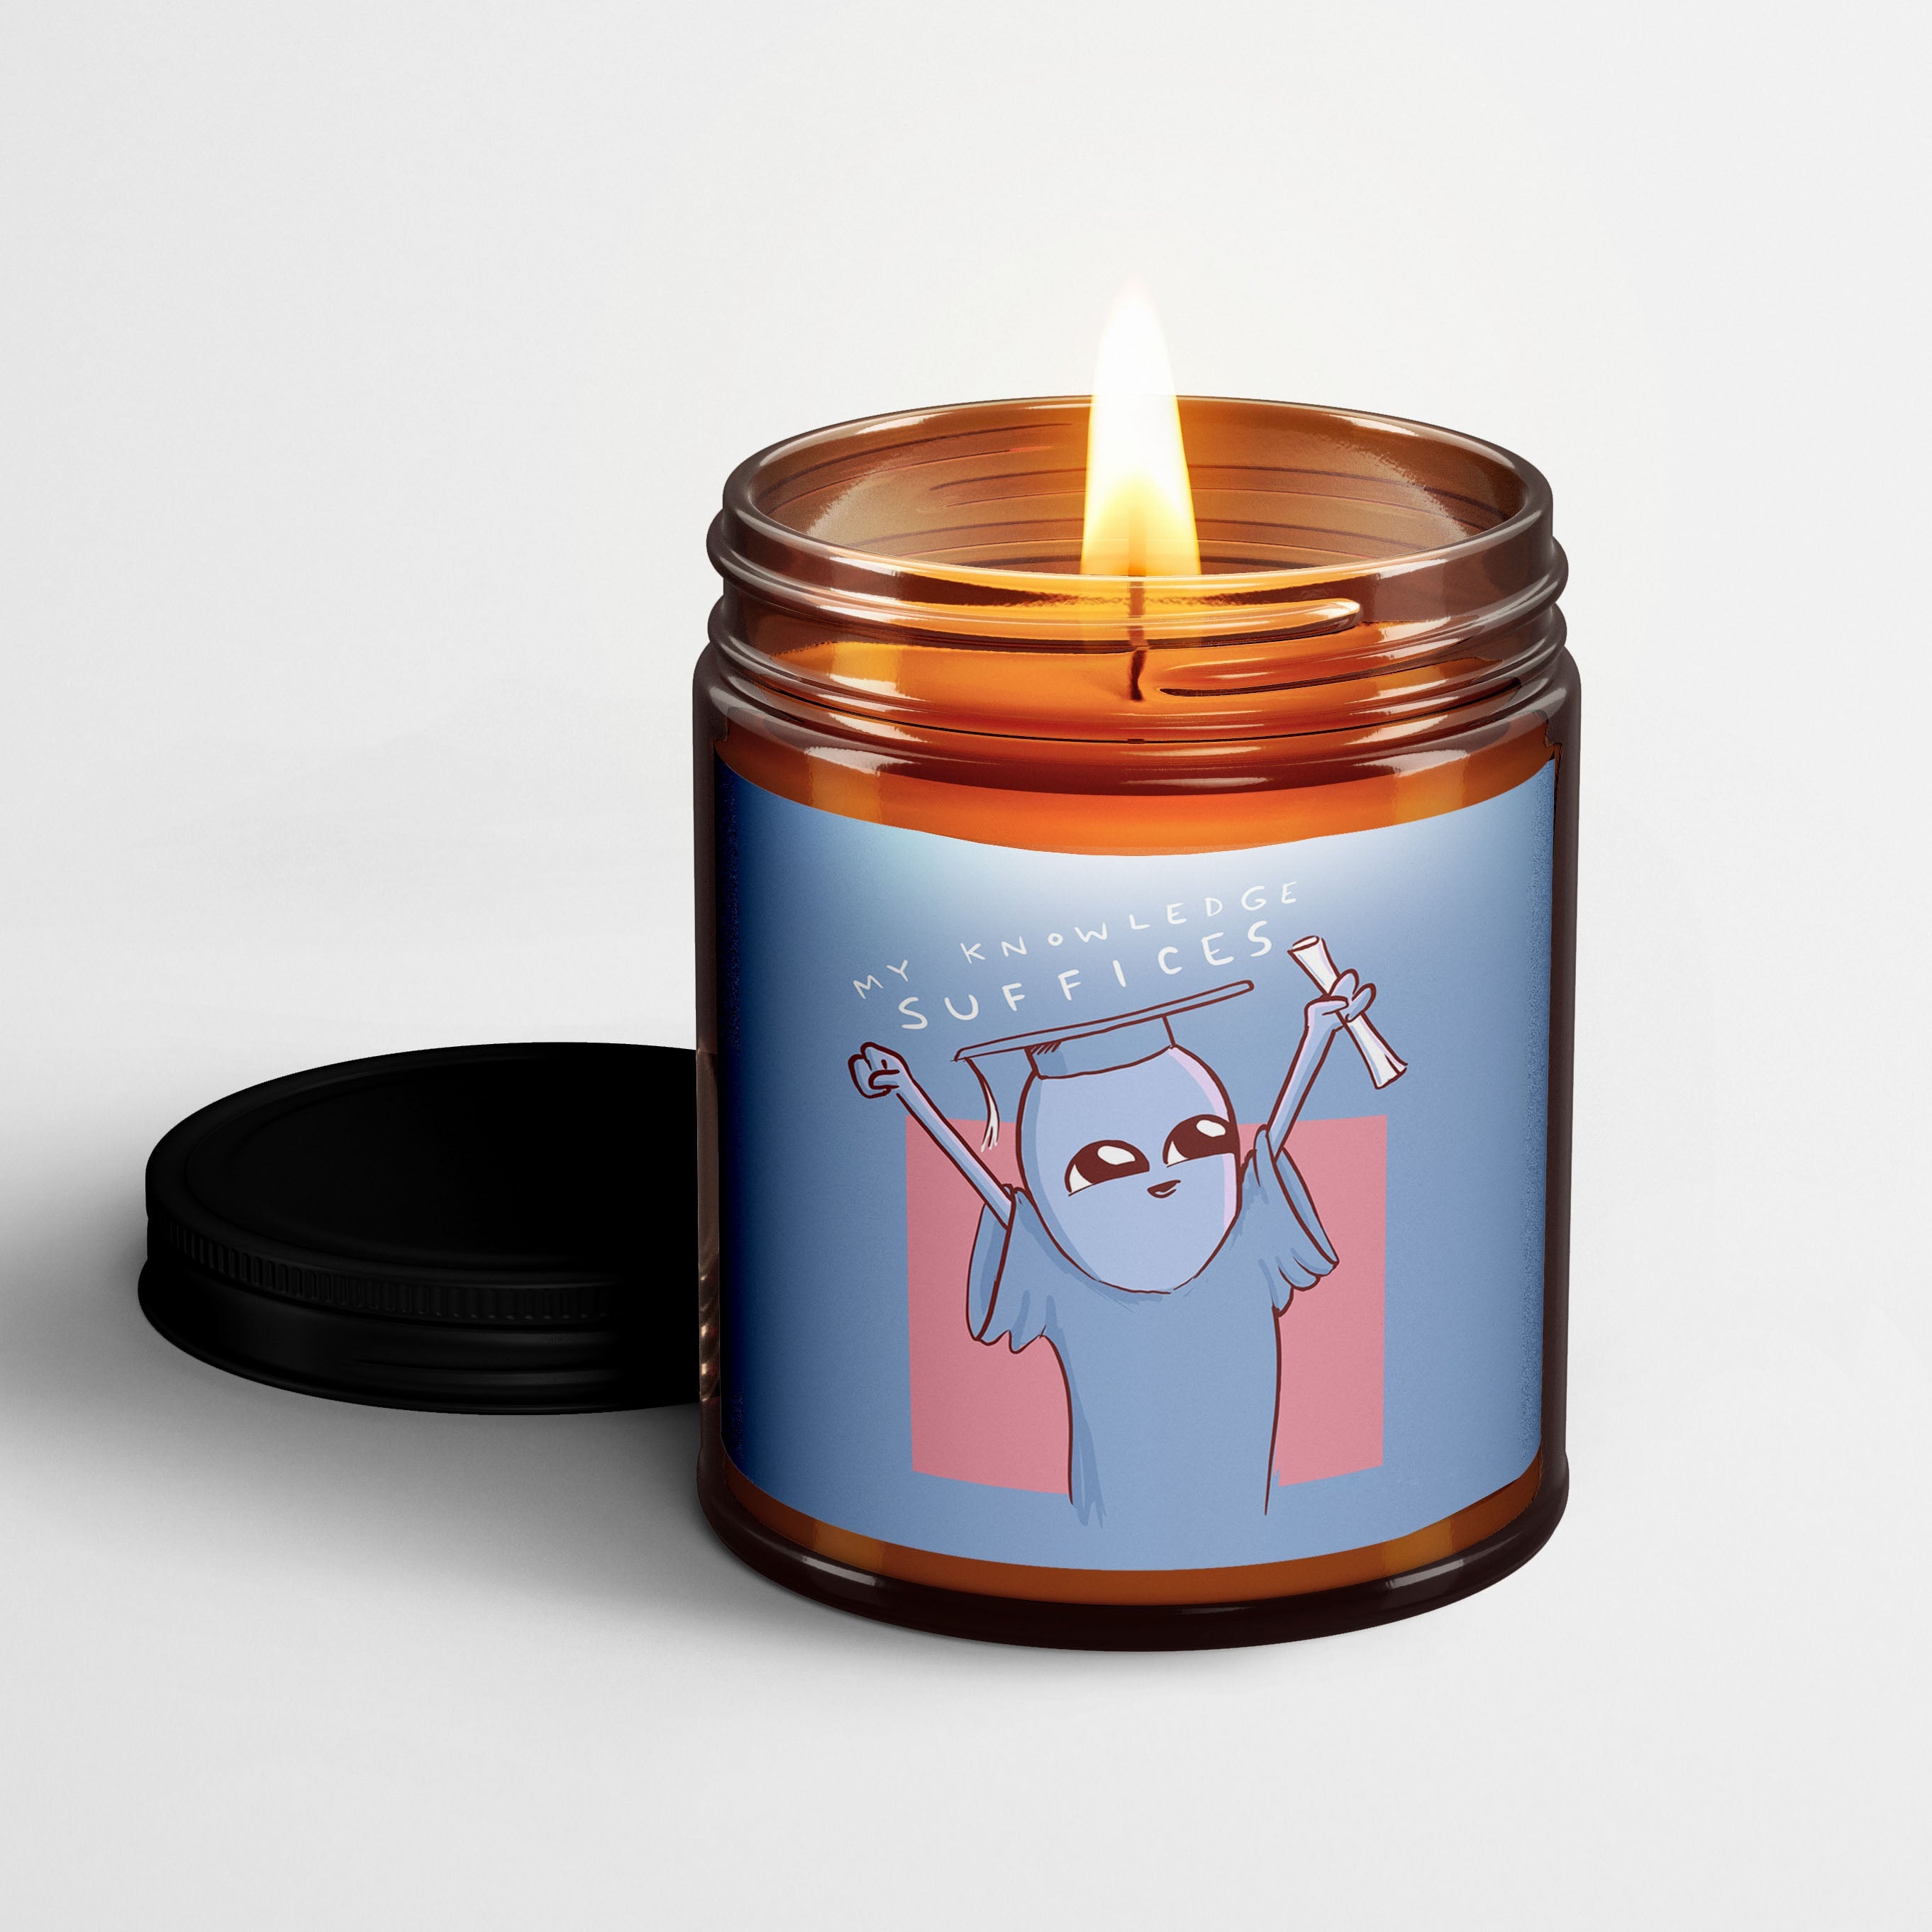 Strange Planet Scented Candle I My Knowledge Suffices | Nathan W Pyle